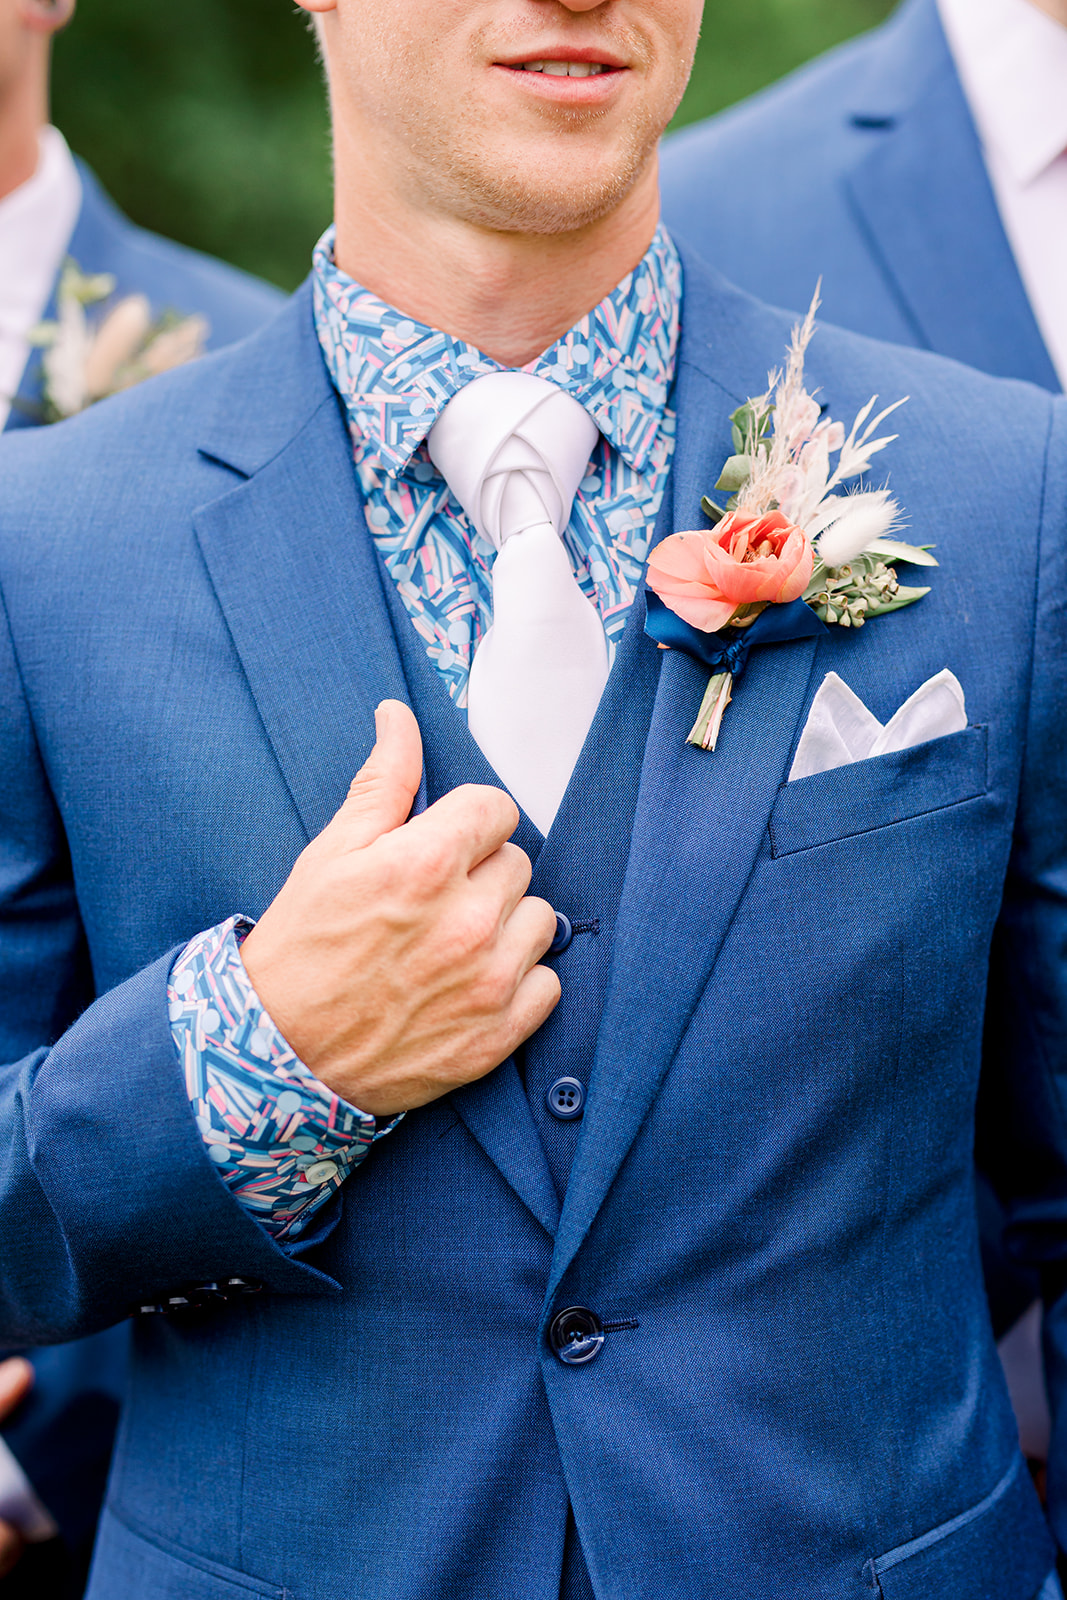 Groom style in blue suit featuring tie and boutonniere